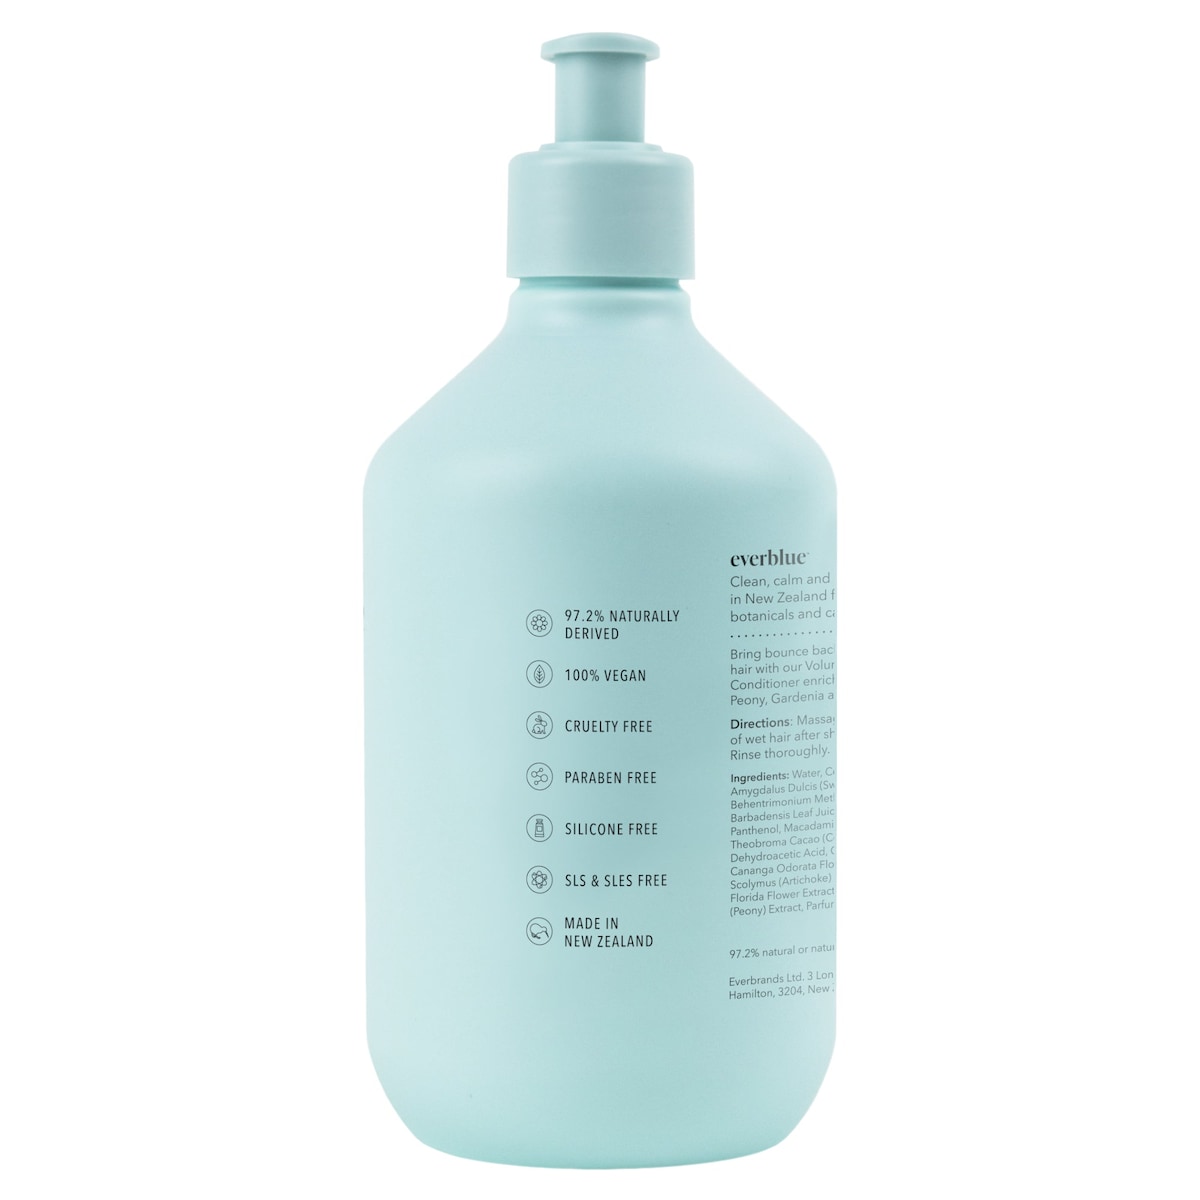 Everblue Conditioner Empower Volume and Shine 400ml